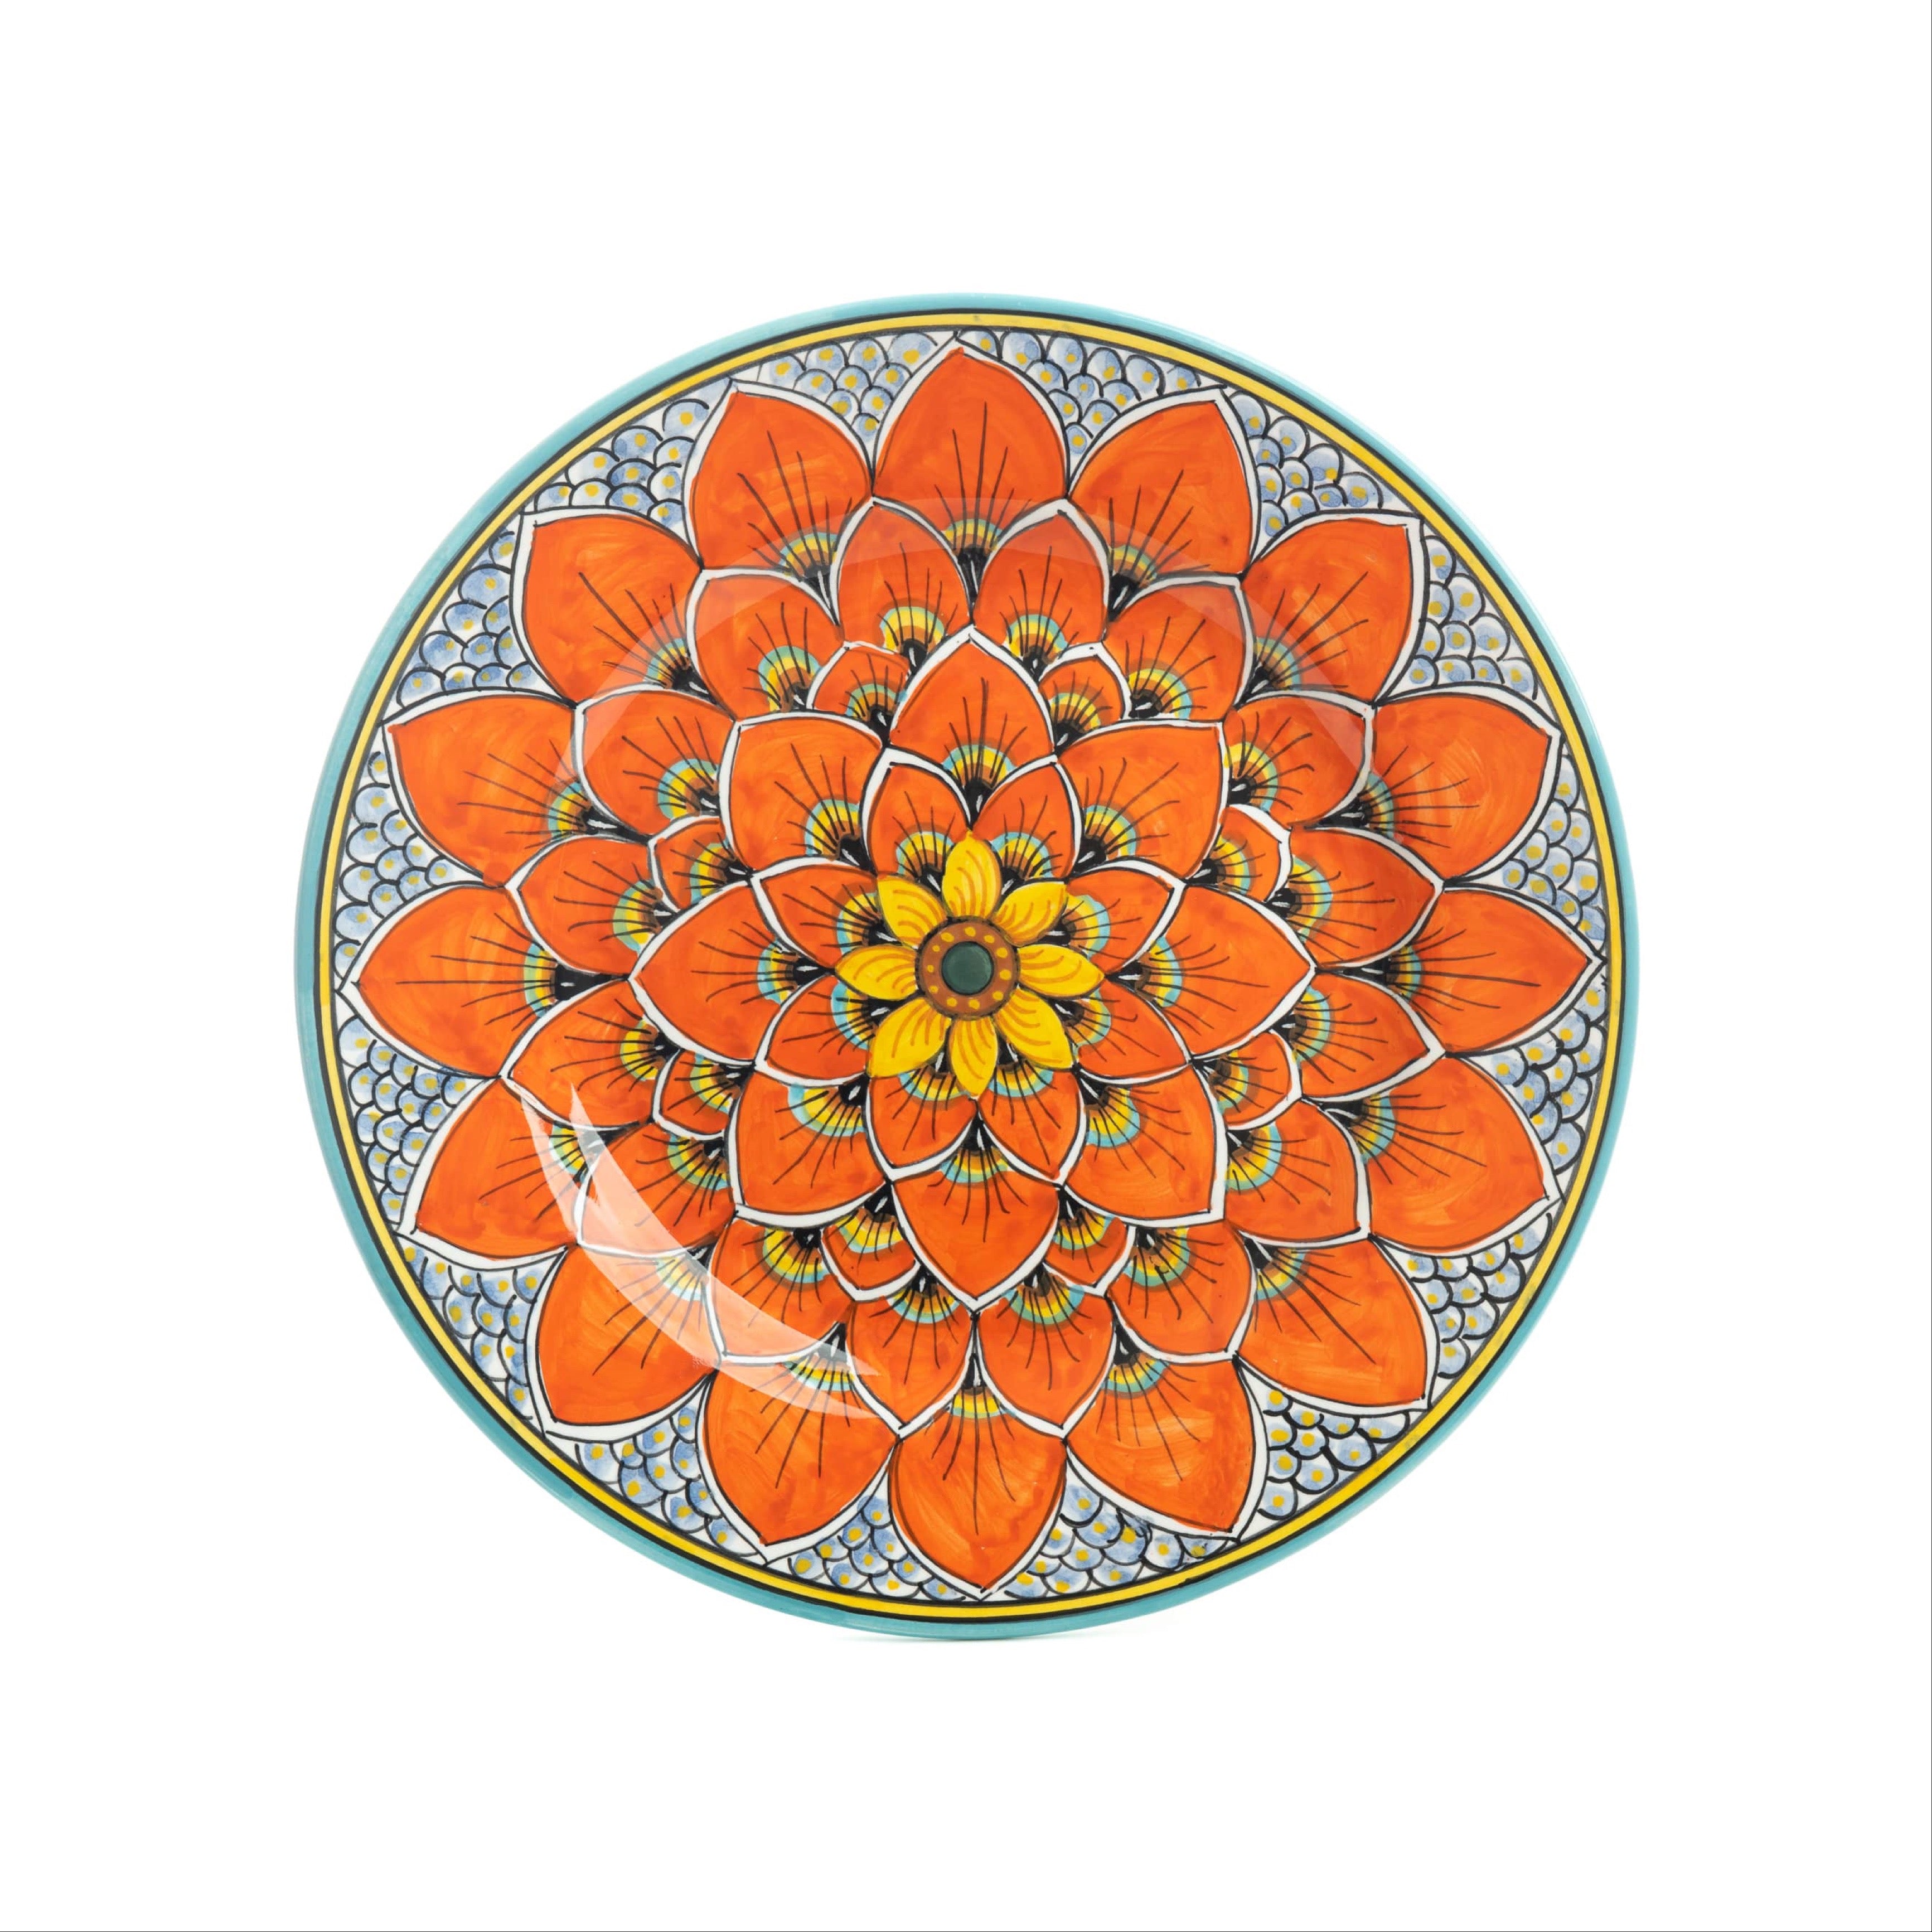 Geribi Salad Plate (PG11) Burnt Orange Peacock Design, ceramics, pottery, italian design, majolica, handmade, handcrafted, handpainted, home decor, kitchen art, home goods, deruta, majolica, Artisan, treasures, traditional art, modern art, gift ideas, style, SF, shop small business, artists, shop online, landmark store, legacy, one of a kind, limited edition, gift guide, gift shop, retail shop, decorations, shopping, italy, home staging, home decorating, home interiors